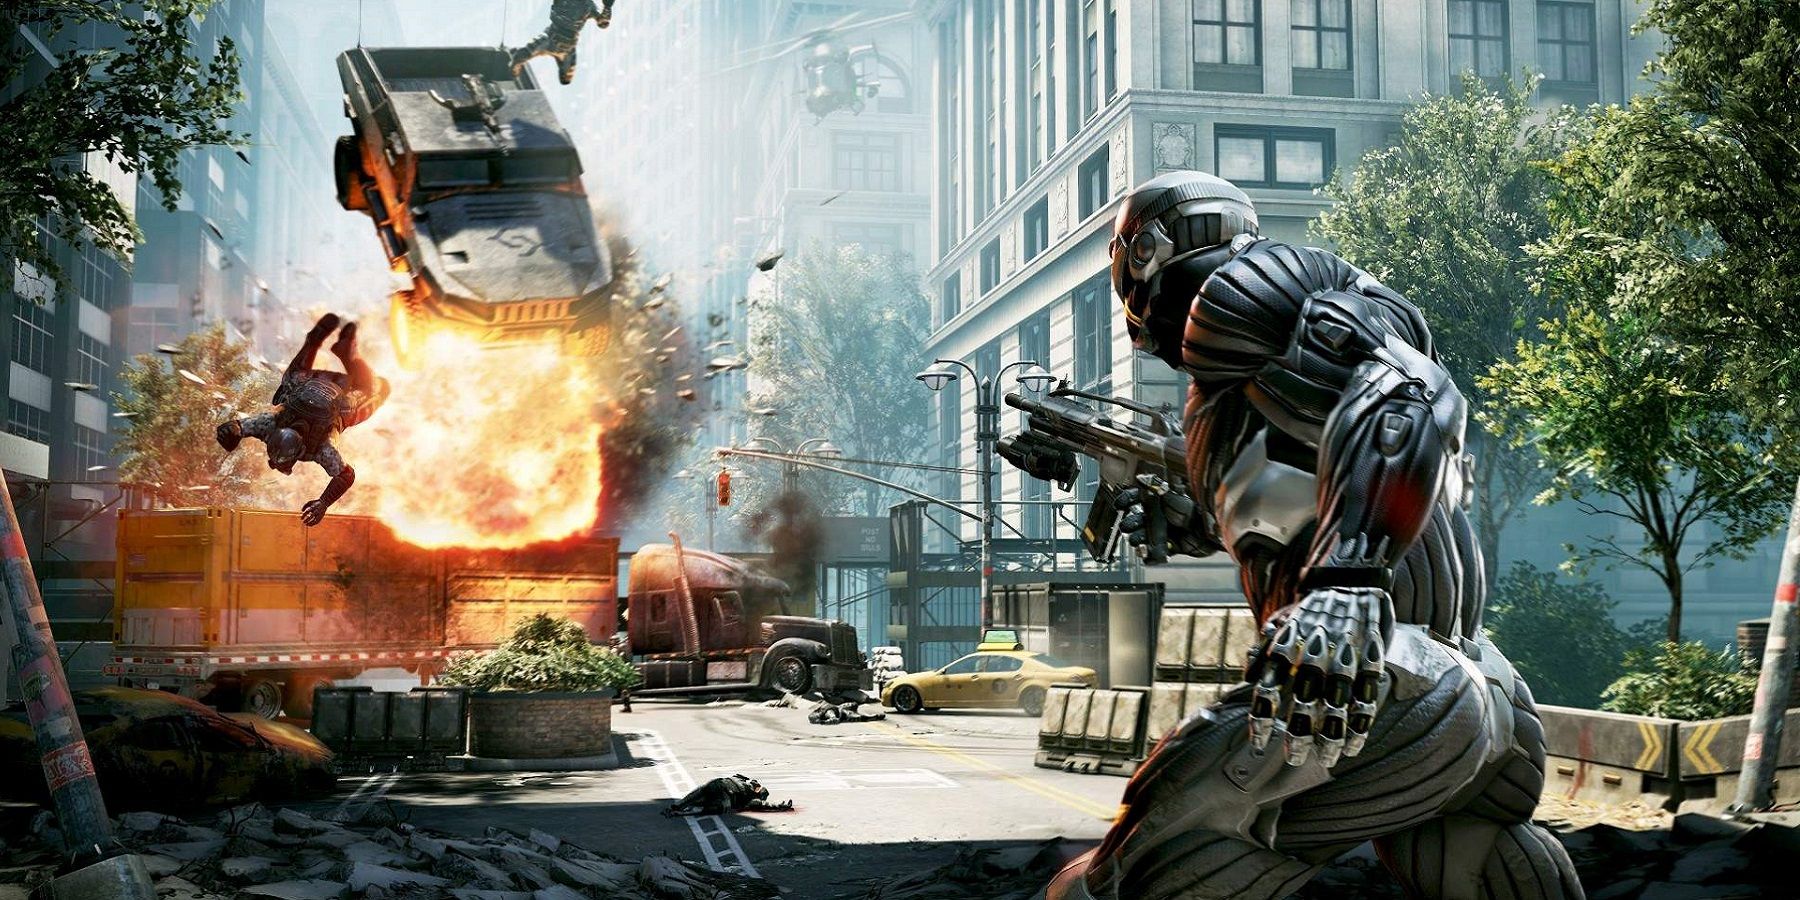 Image from Crysis showing a nanosuit-wearing soldier looking on a car explodes in the background.